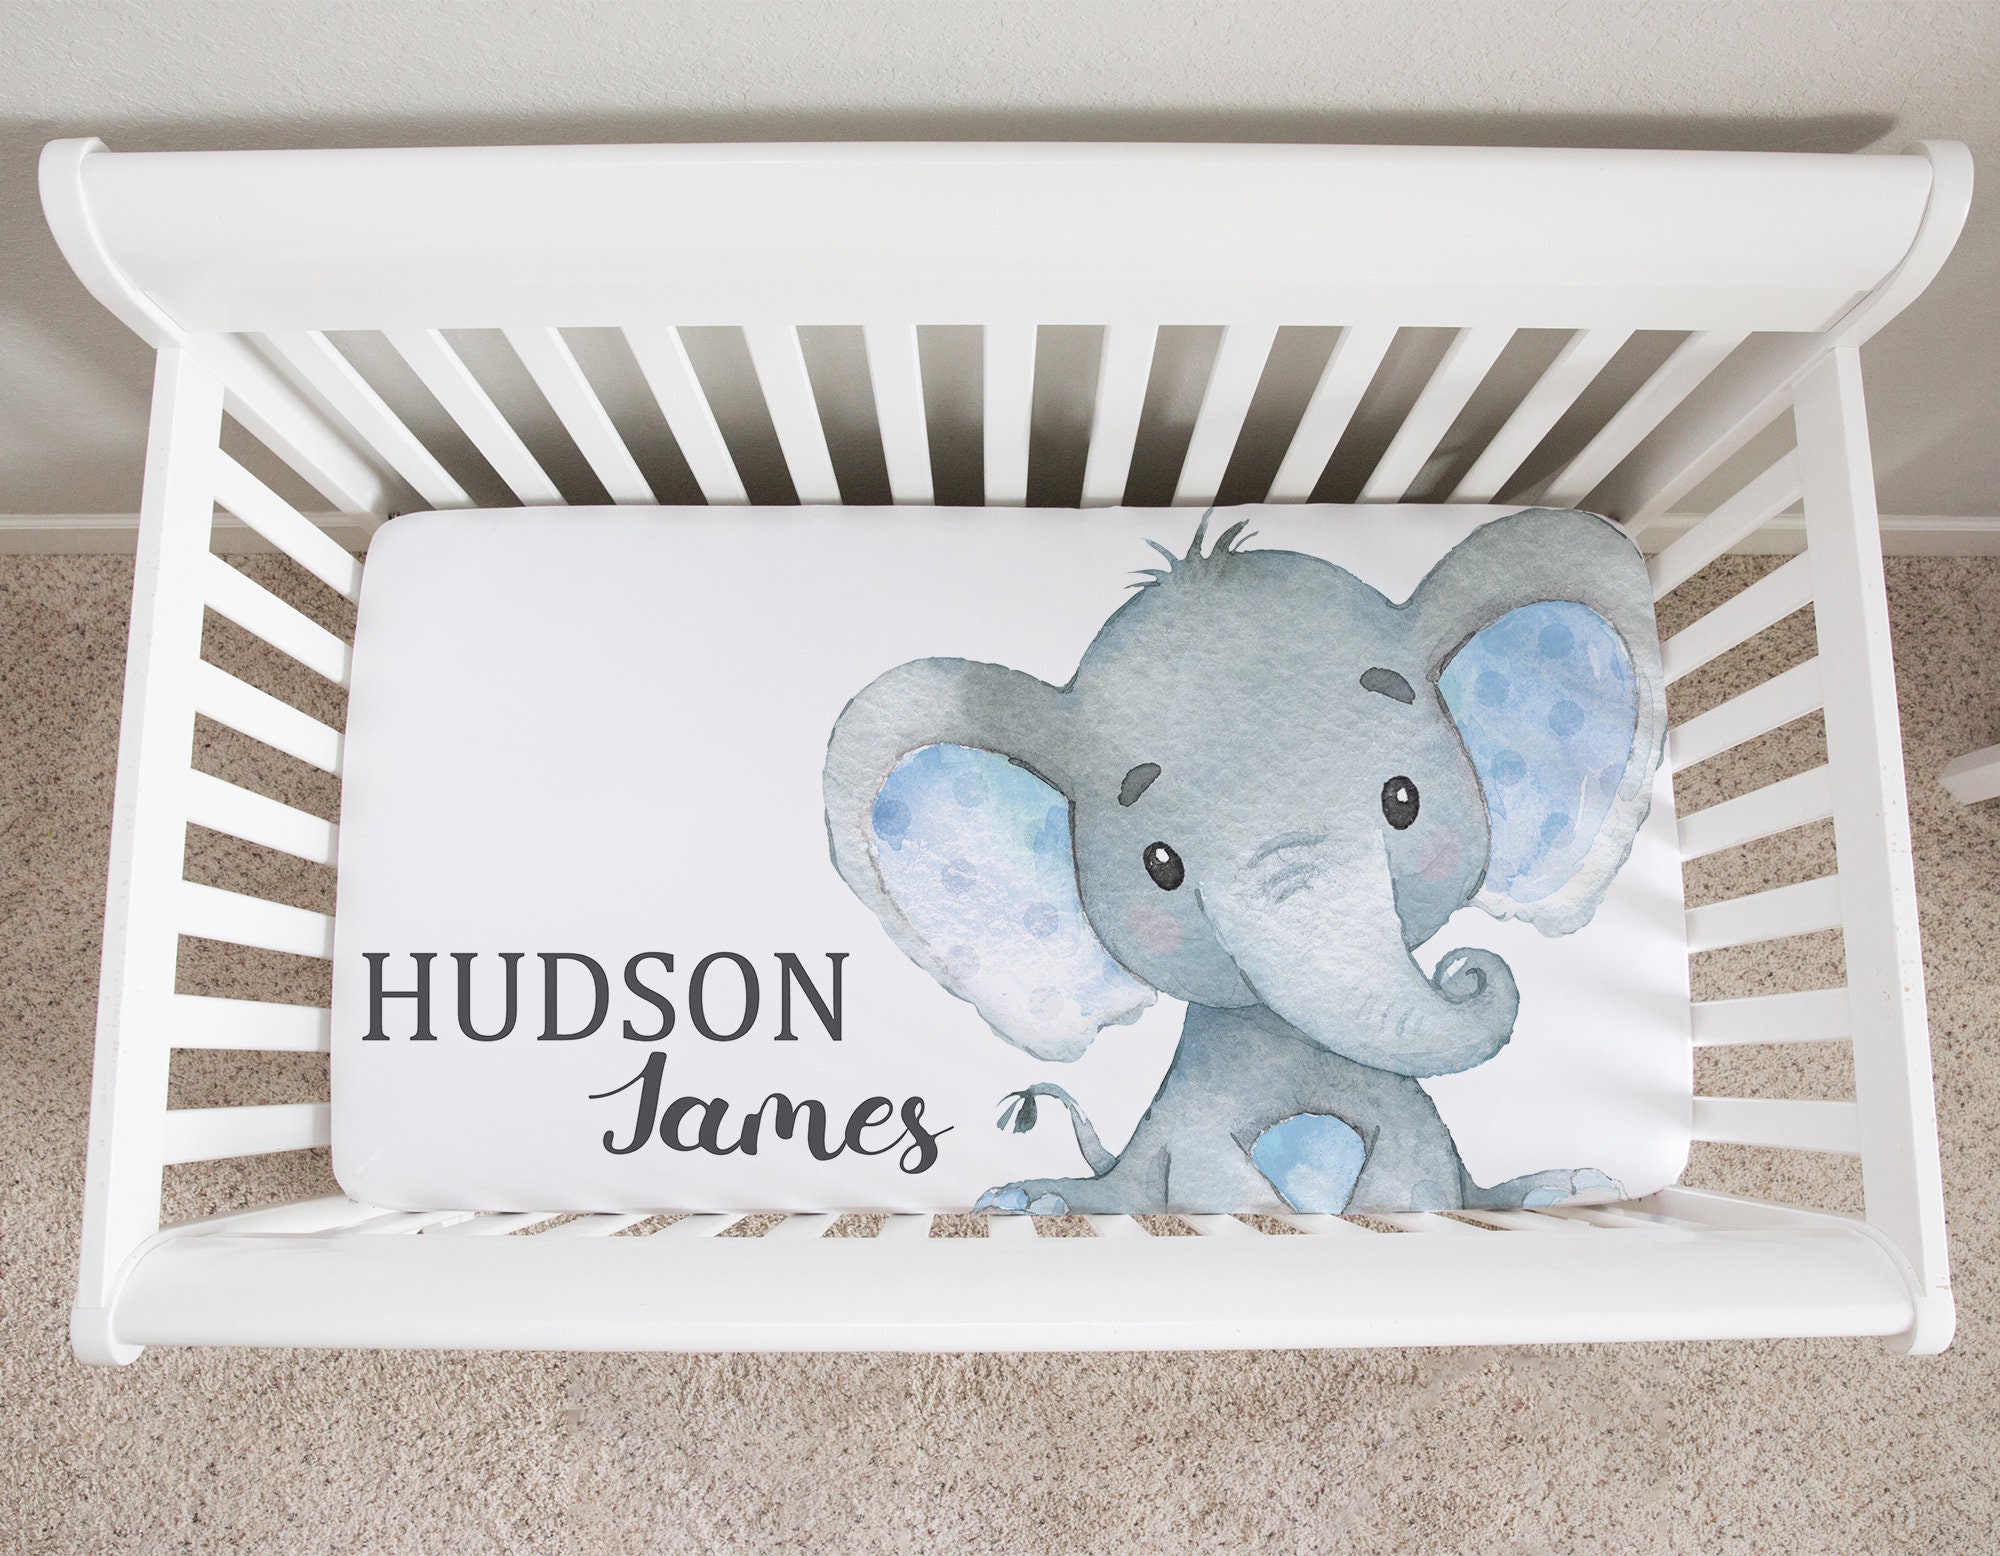 Blue Gray Elephant Baby Boy Nursery Wrapping Paper by decampstudios